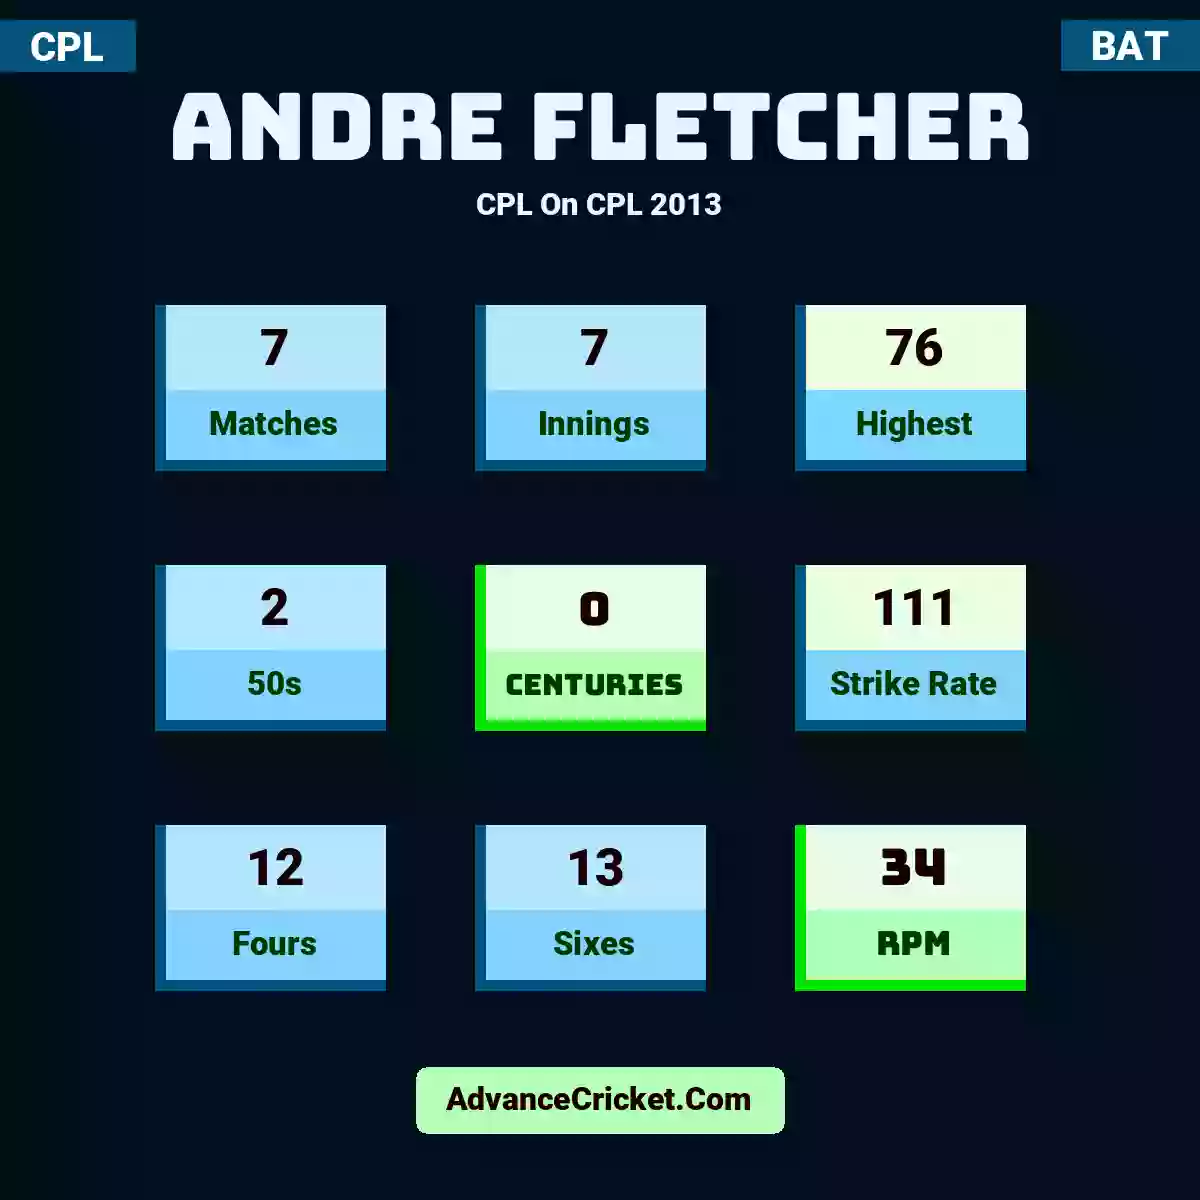 Andre Fletcher CPL  On CPL 2013, Andre Fletcher played 7 matches, scored 76 runs as highest, 2 half-centuries, and 0 centuries, with a strike rate of 111. A.Fletcher hit 12 fours and 13 sixes, with an RPM of 34.